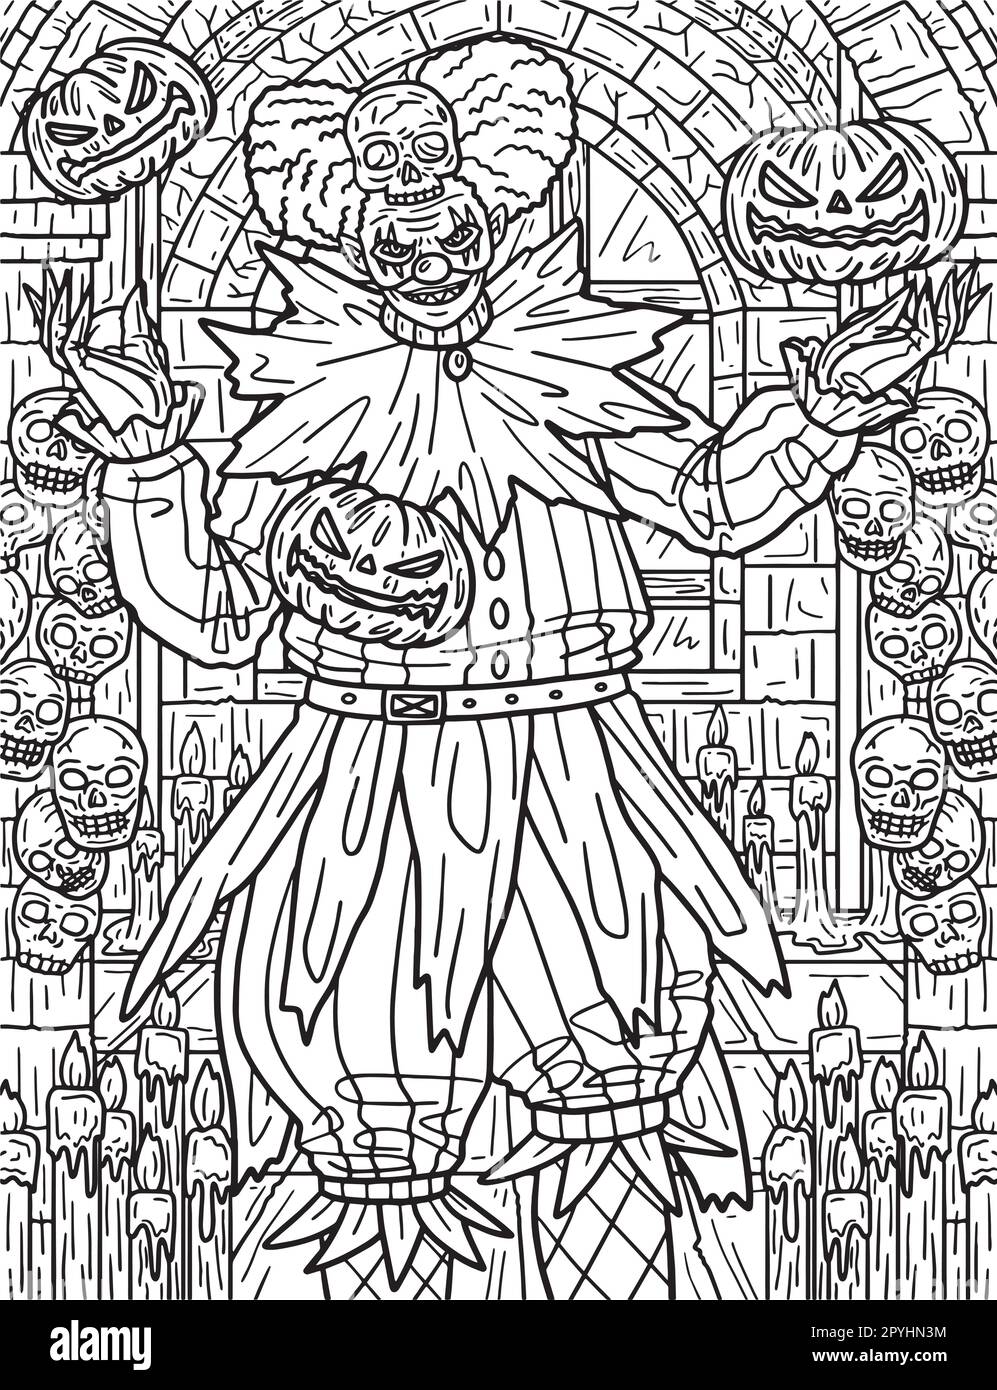 Halloween Clown Coloring Page for Adults Stock Vector